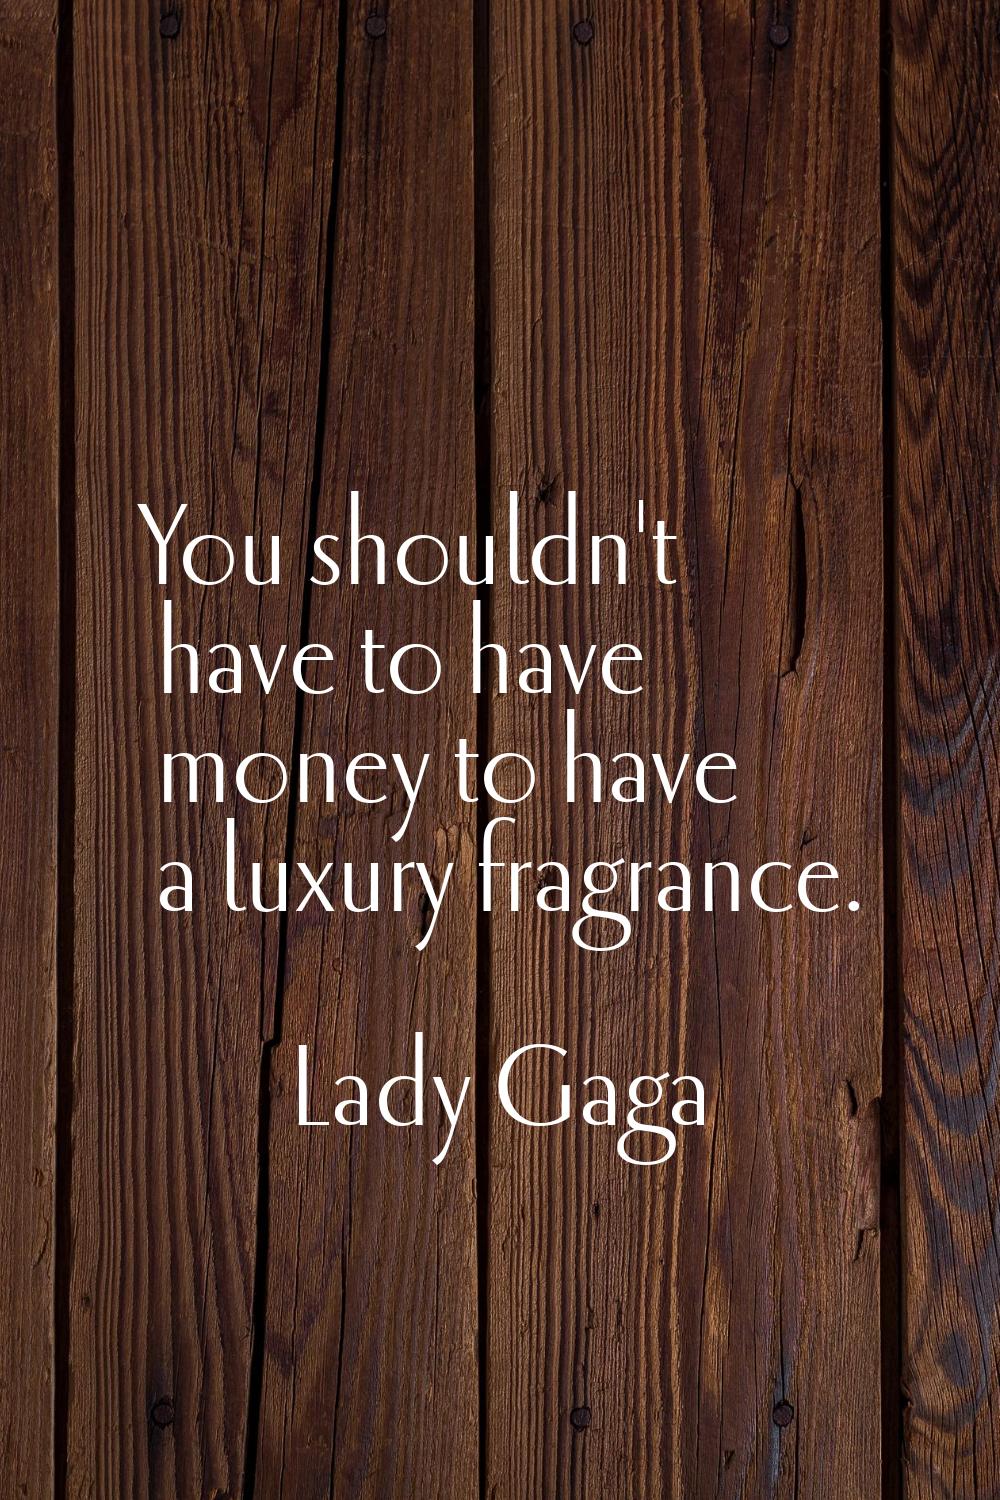 You shouldn't have to have money to have a luxury fragrance.